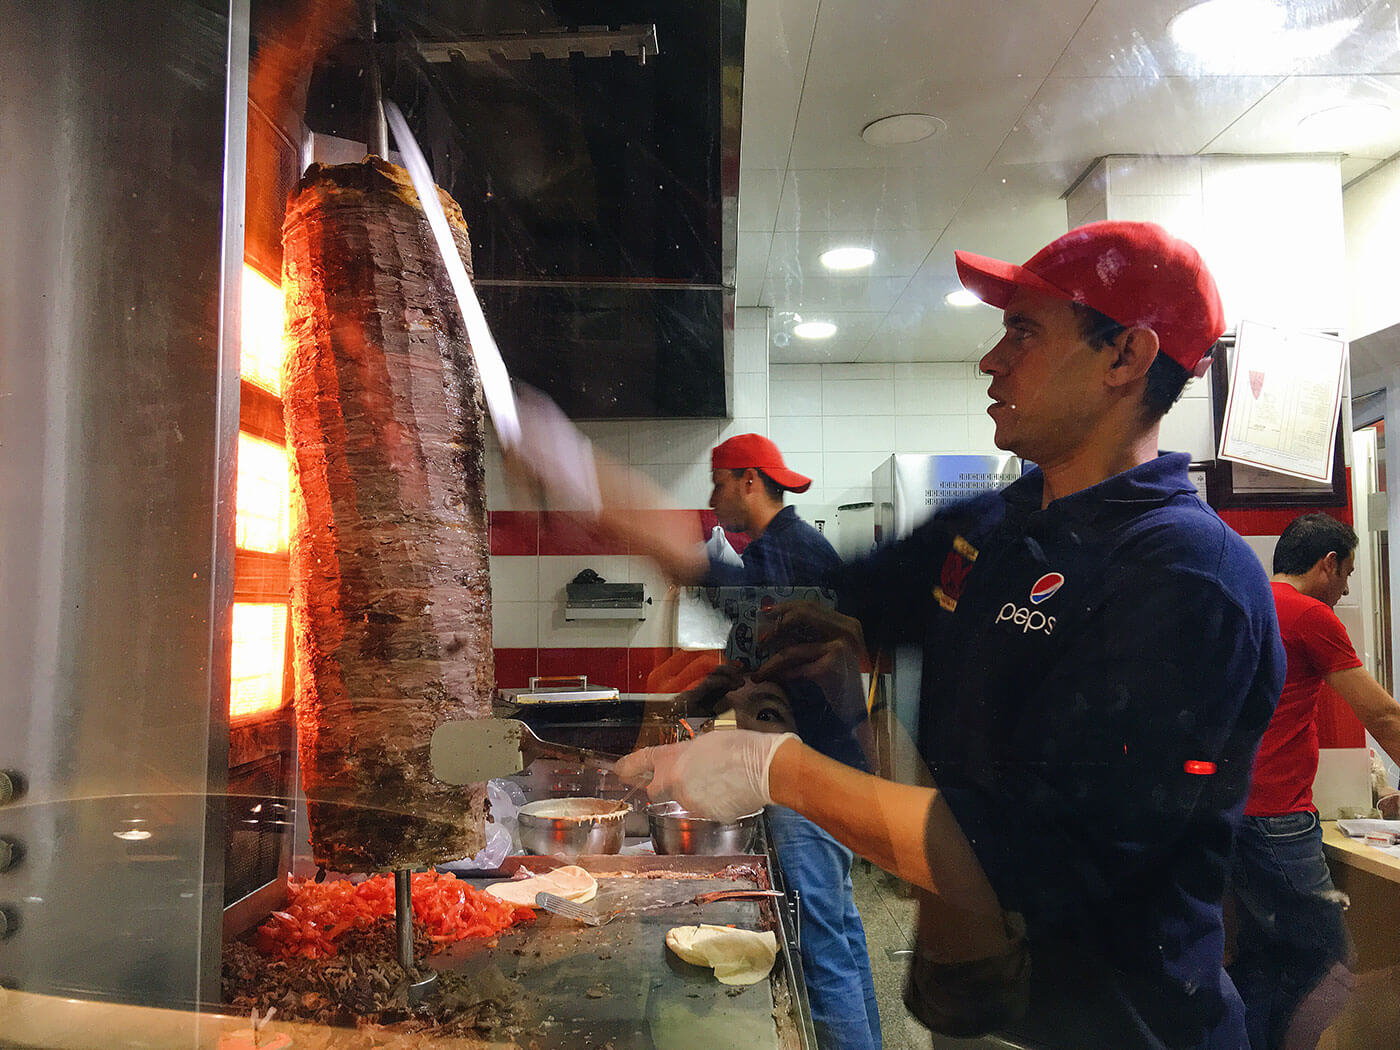 Shaving meat off the vertical spit for Shawarma wrap